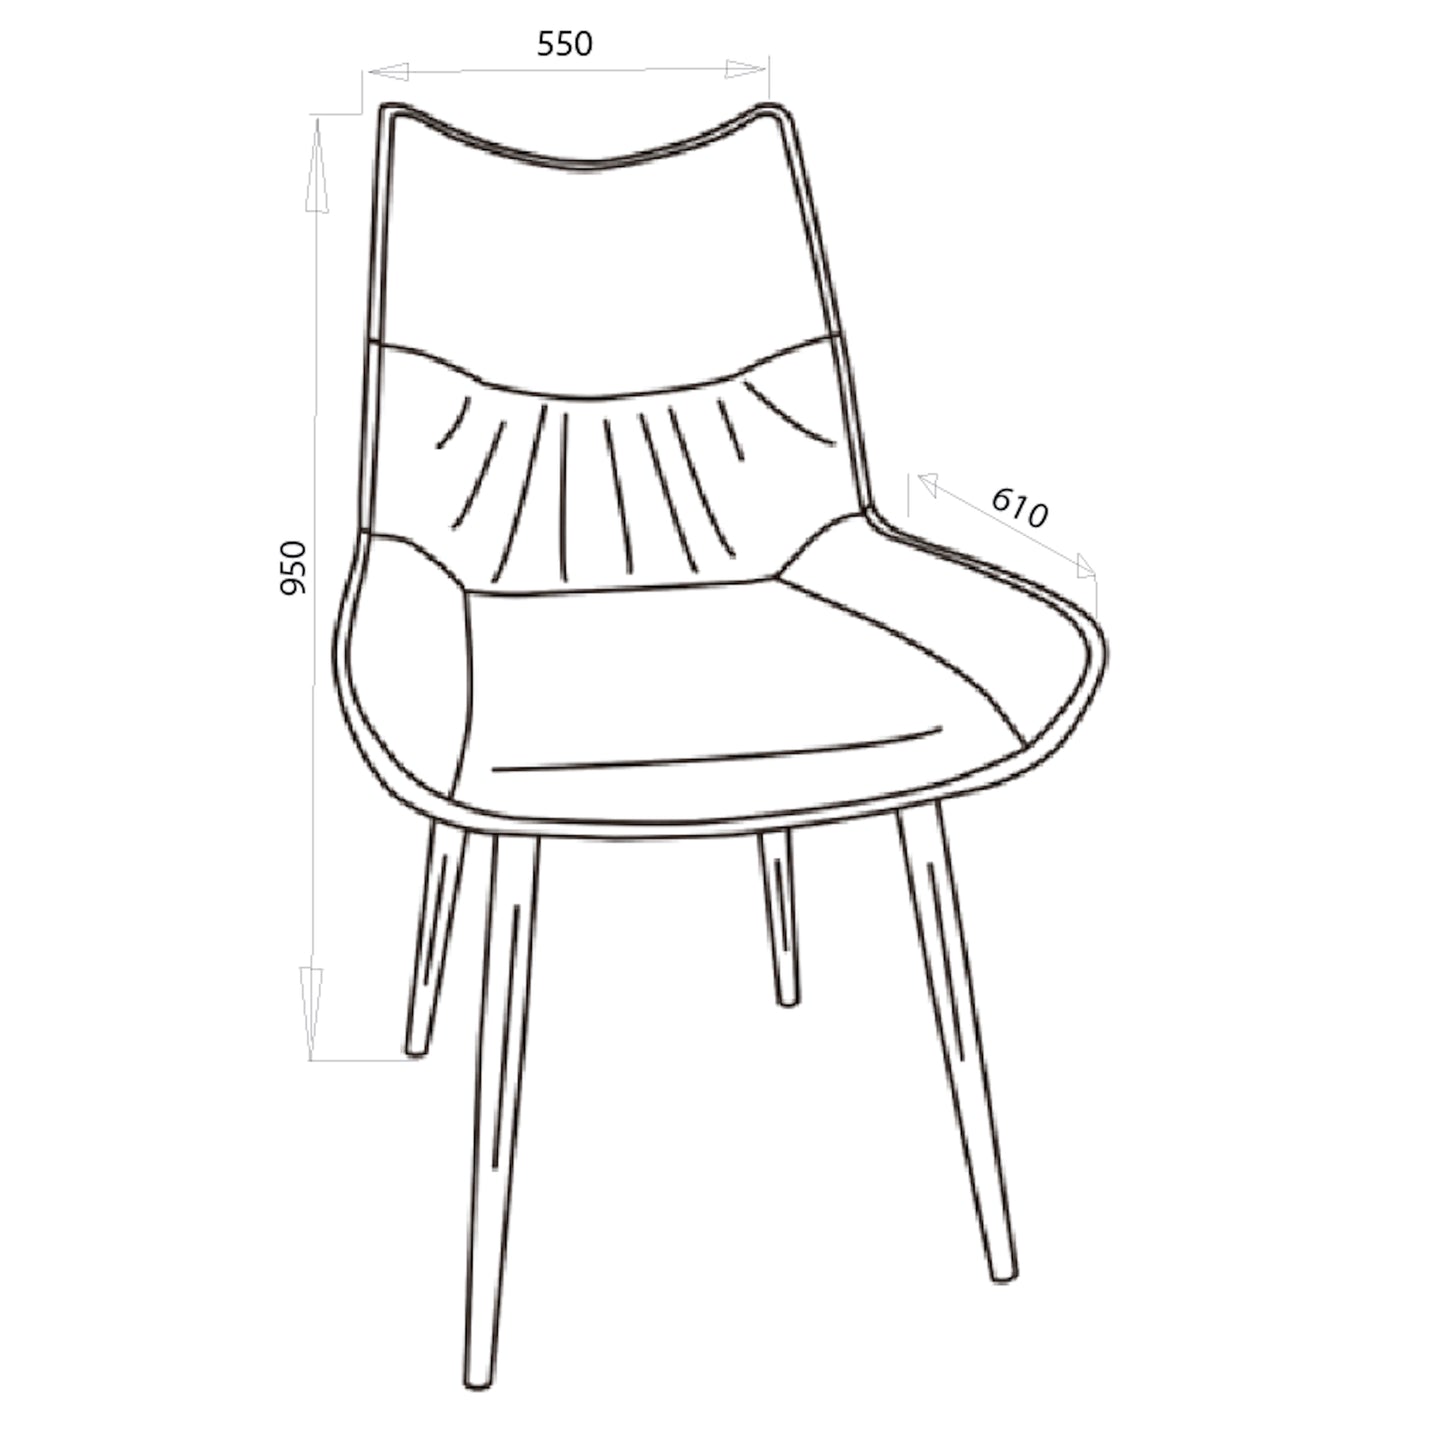 Criterion Jett Dining Chair 830mm PU Leather Cushioned Seat, Carbon Steel Frame Grey